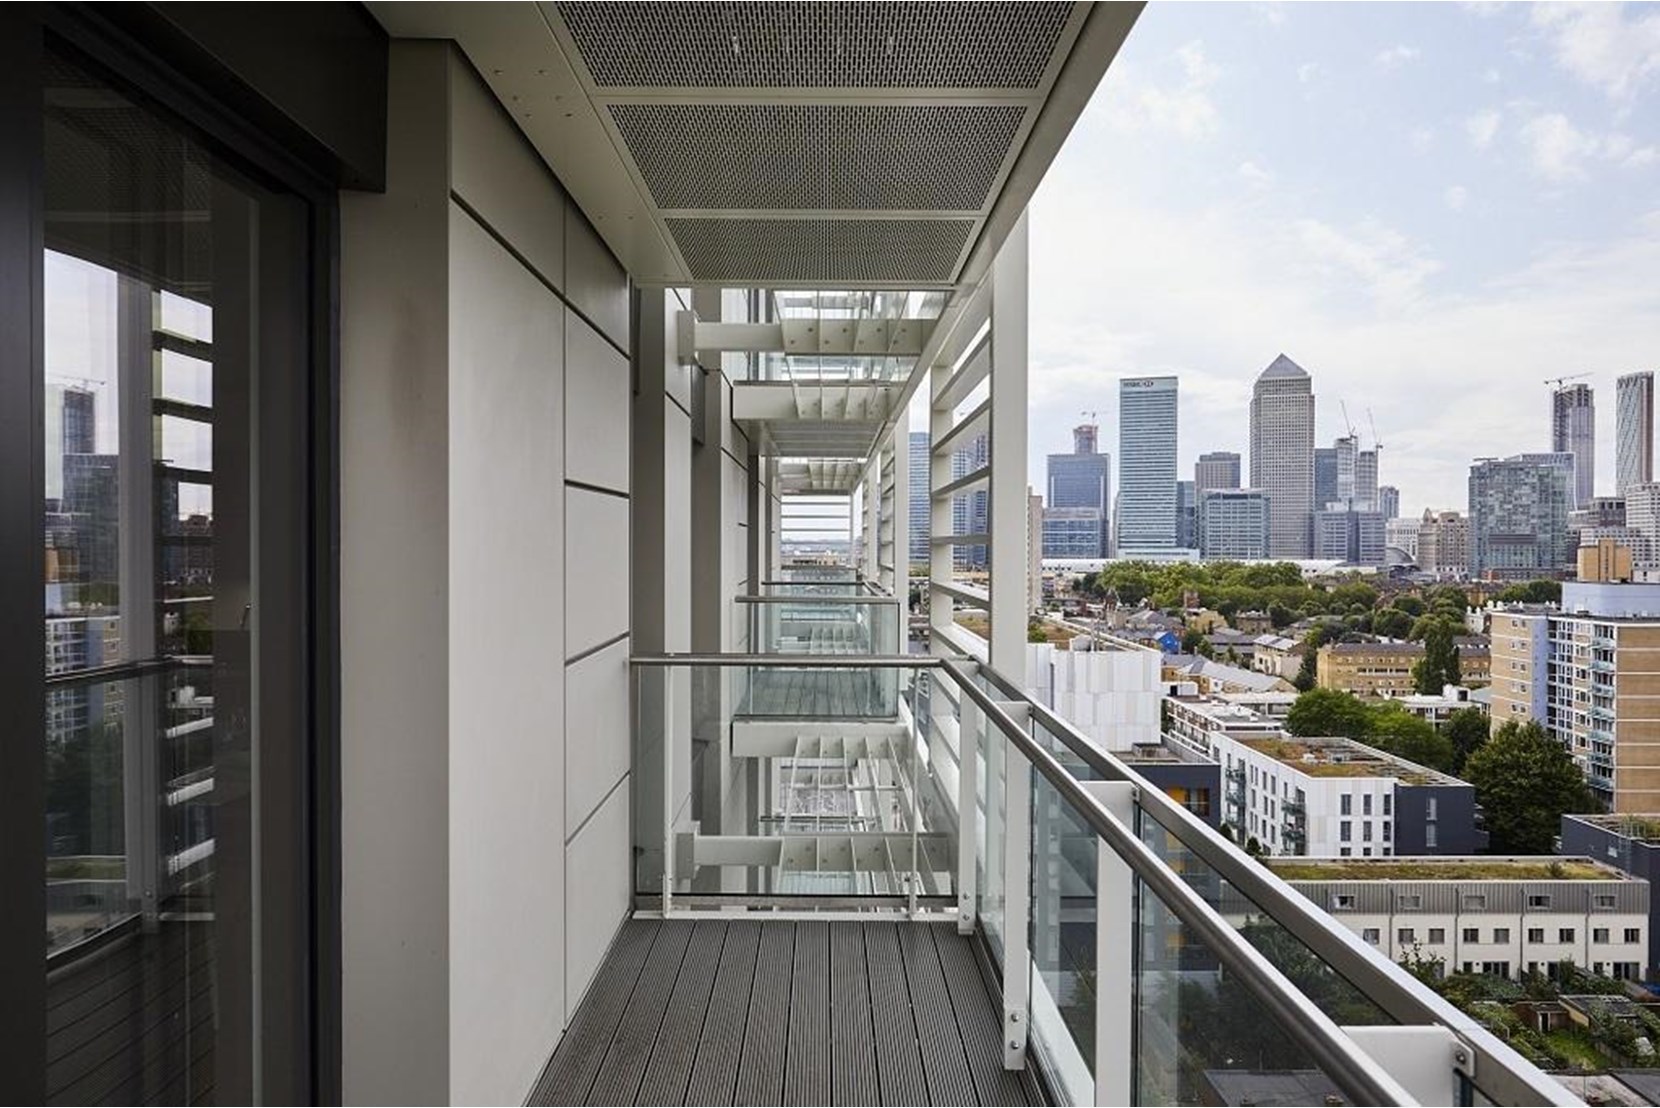 Apartments to Rent by Savills at The Highline, Tower Hamlets, E14, private balcony